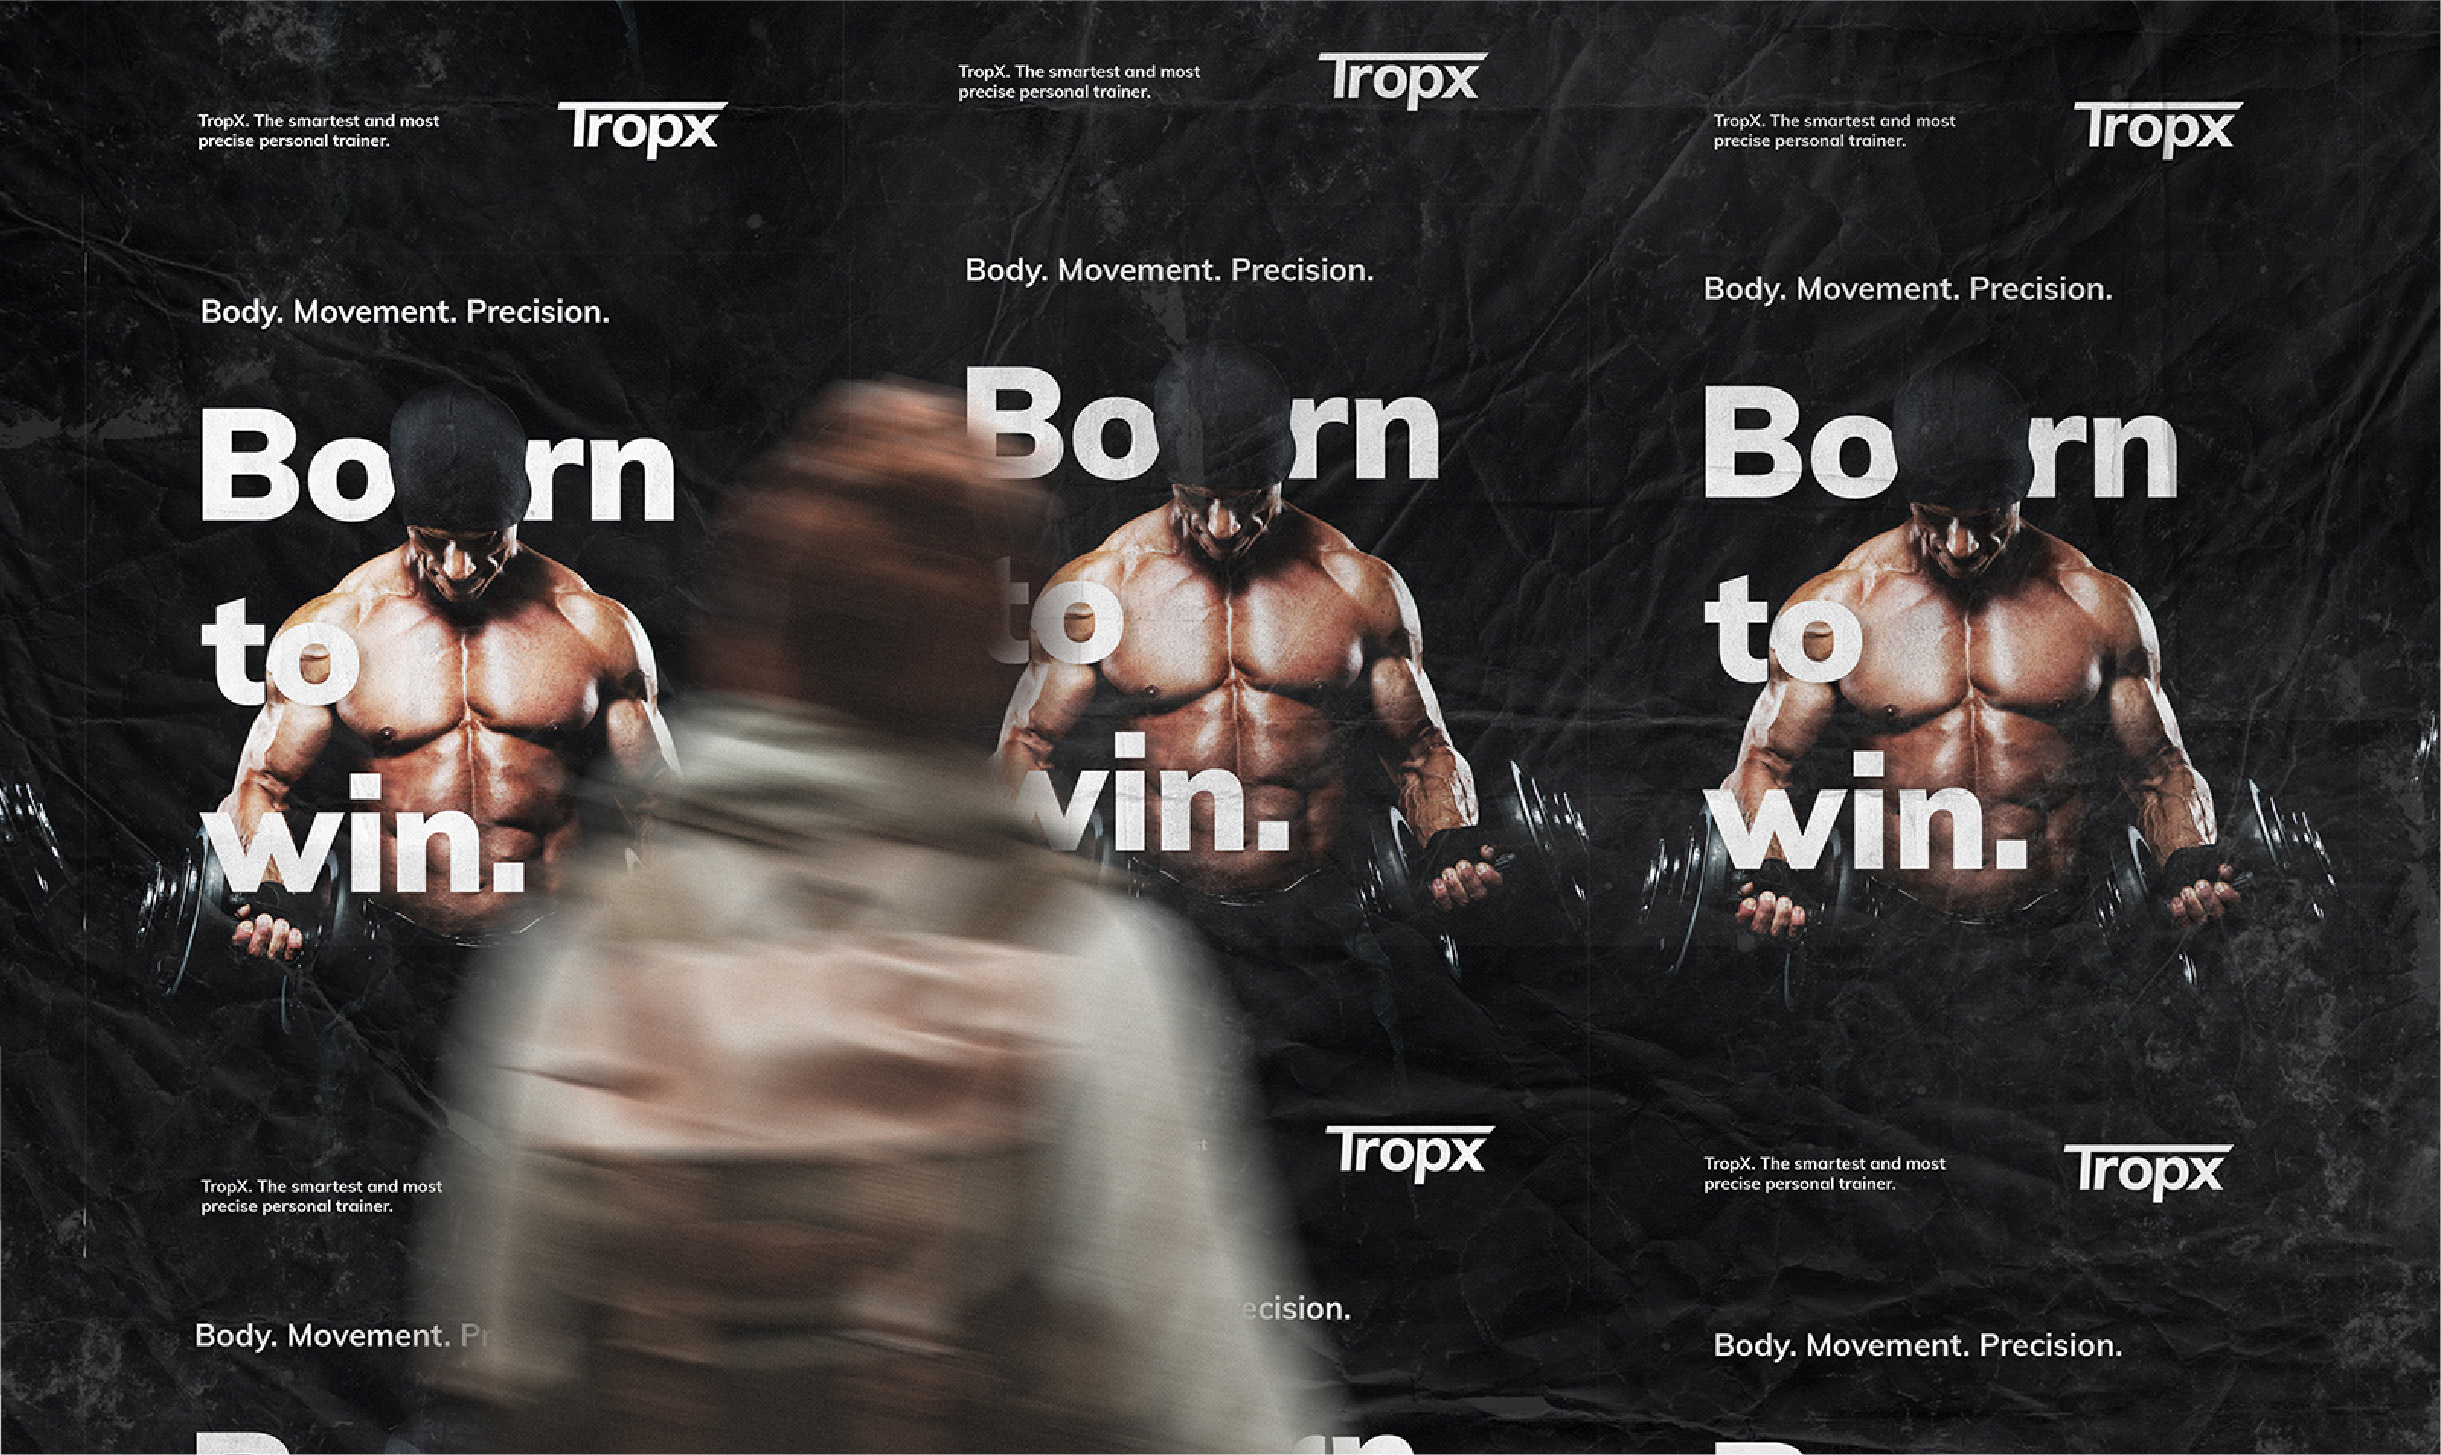 NotFromHere Brand Agency logo design Tropx creative posters design for fitness